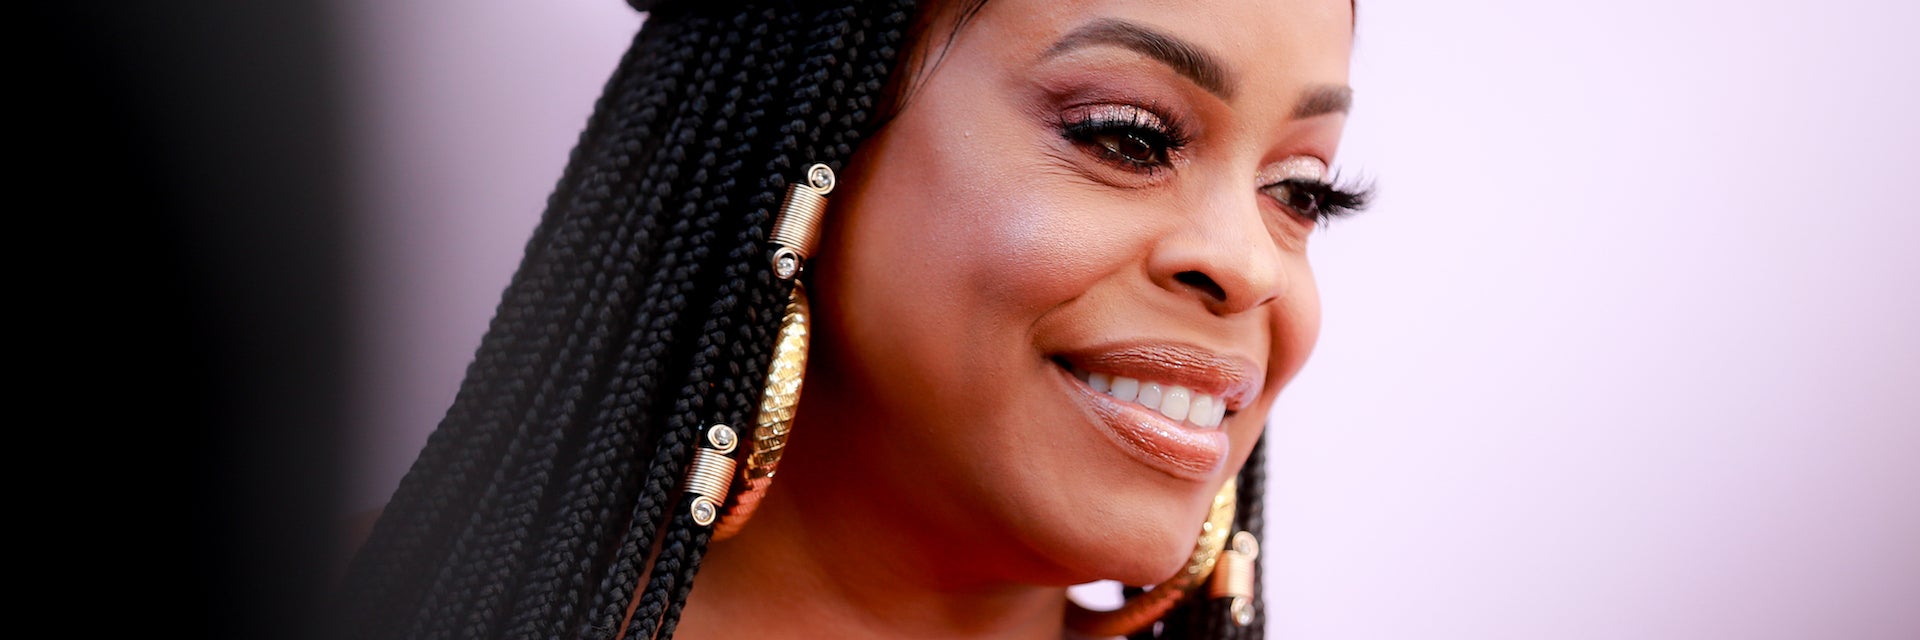 'Uncorked' Star Niecy Nash Is Finally Free